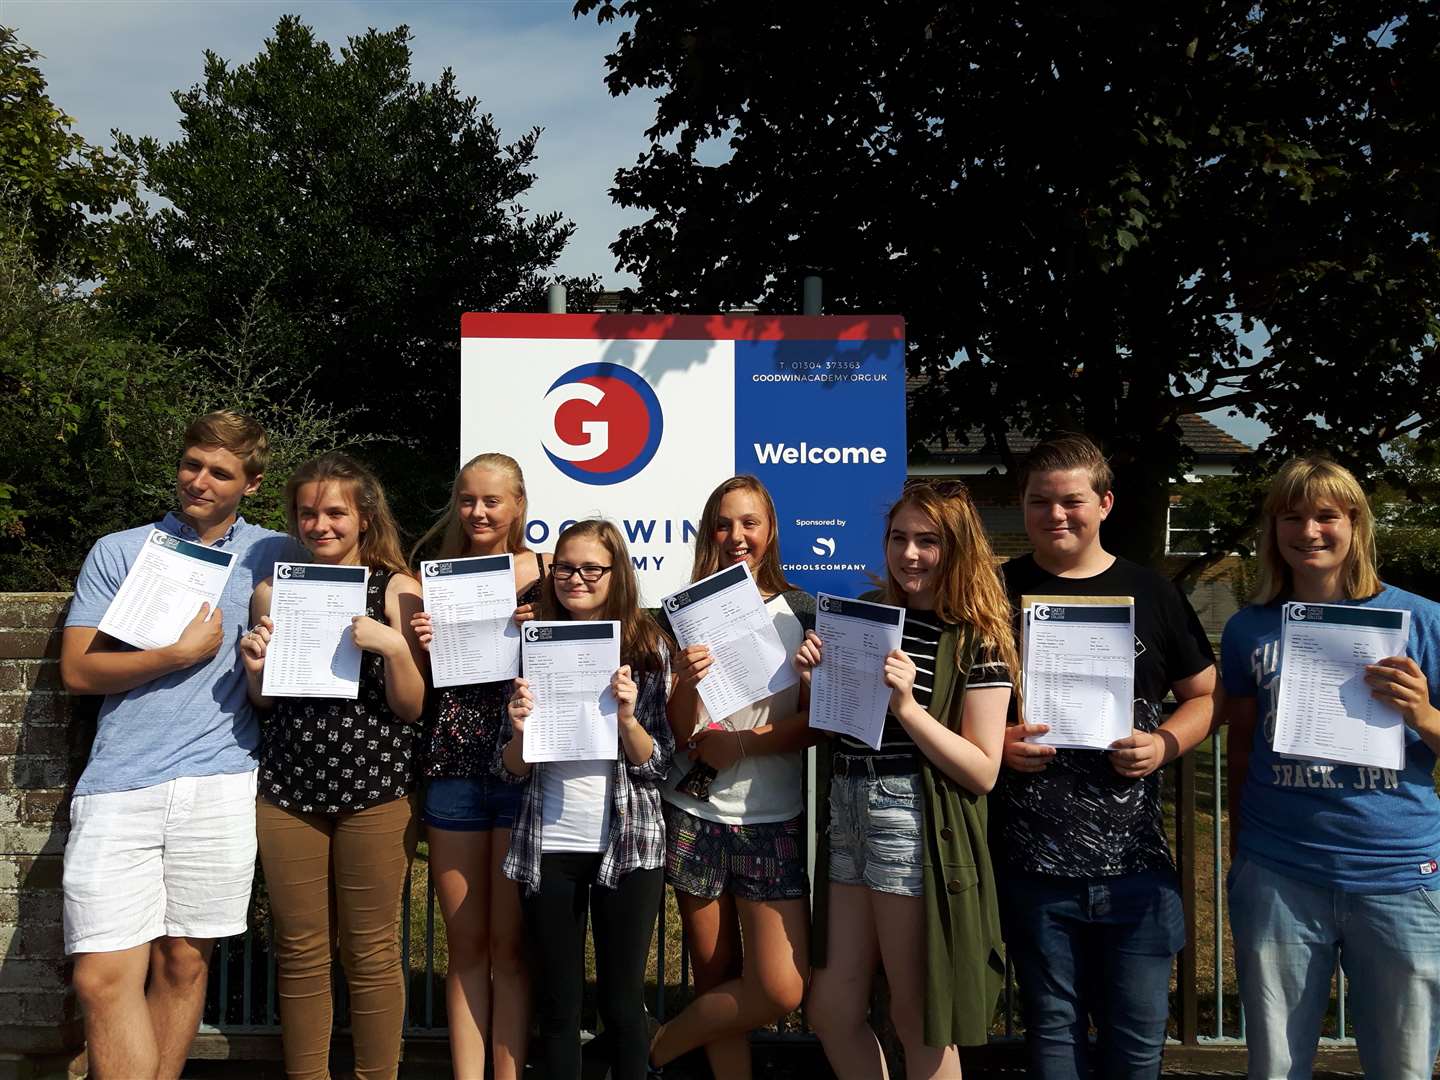 Goodwin Academy pupils celebrating their results